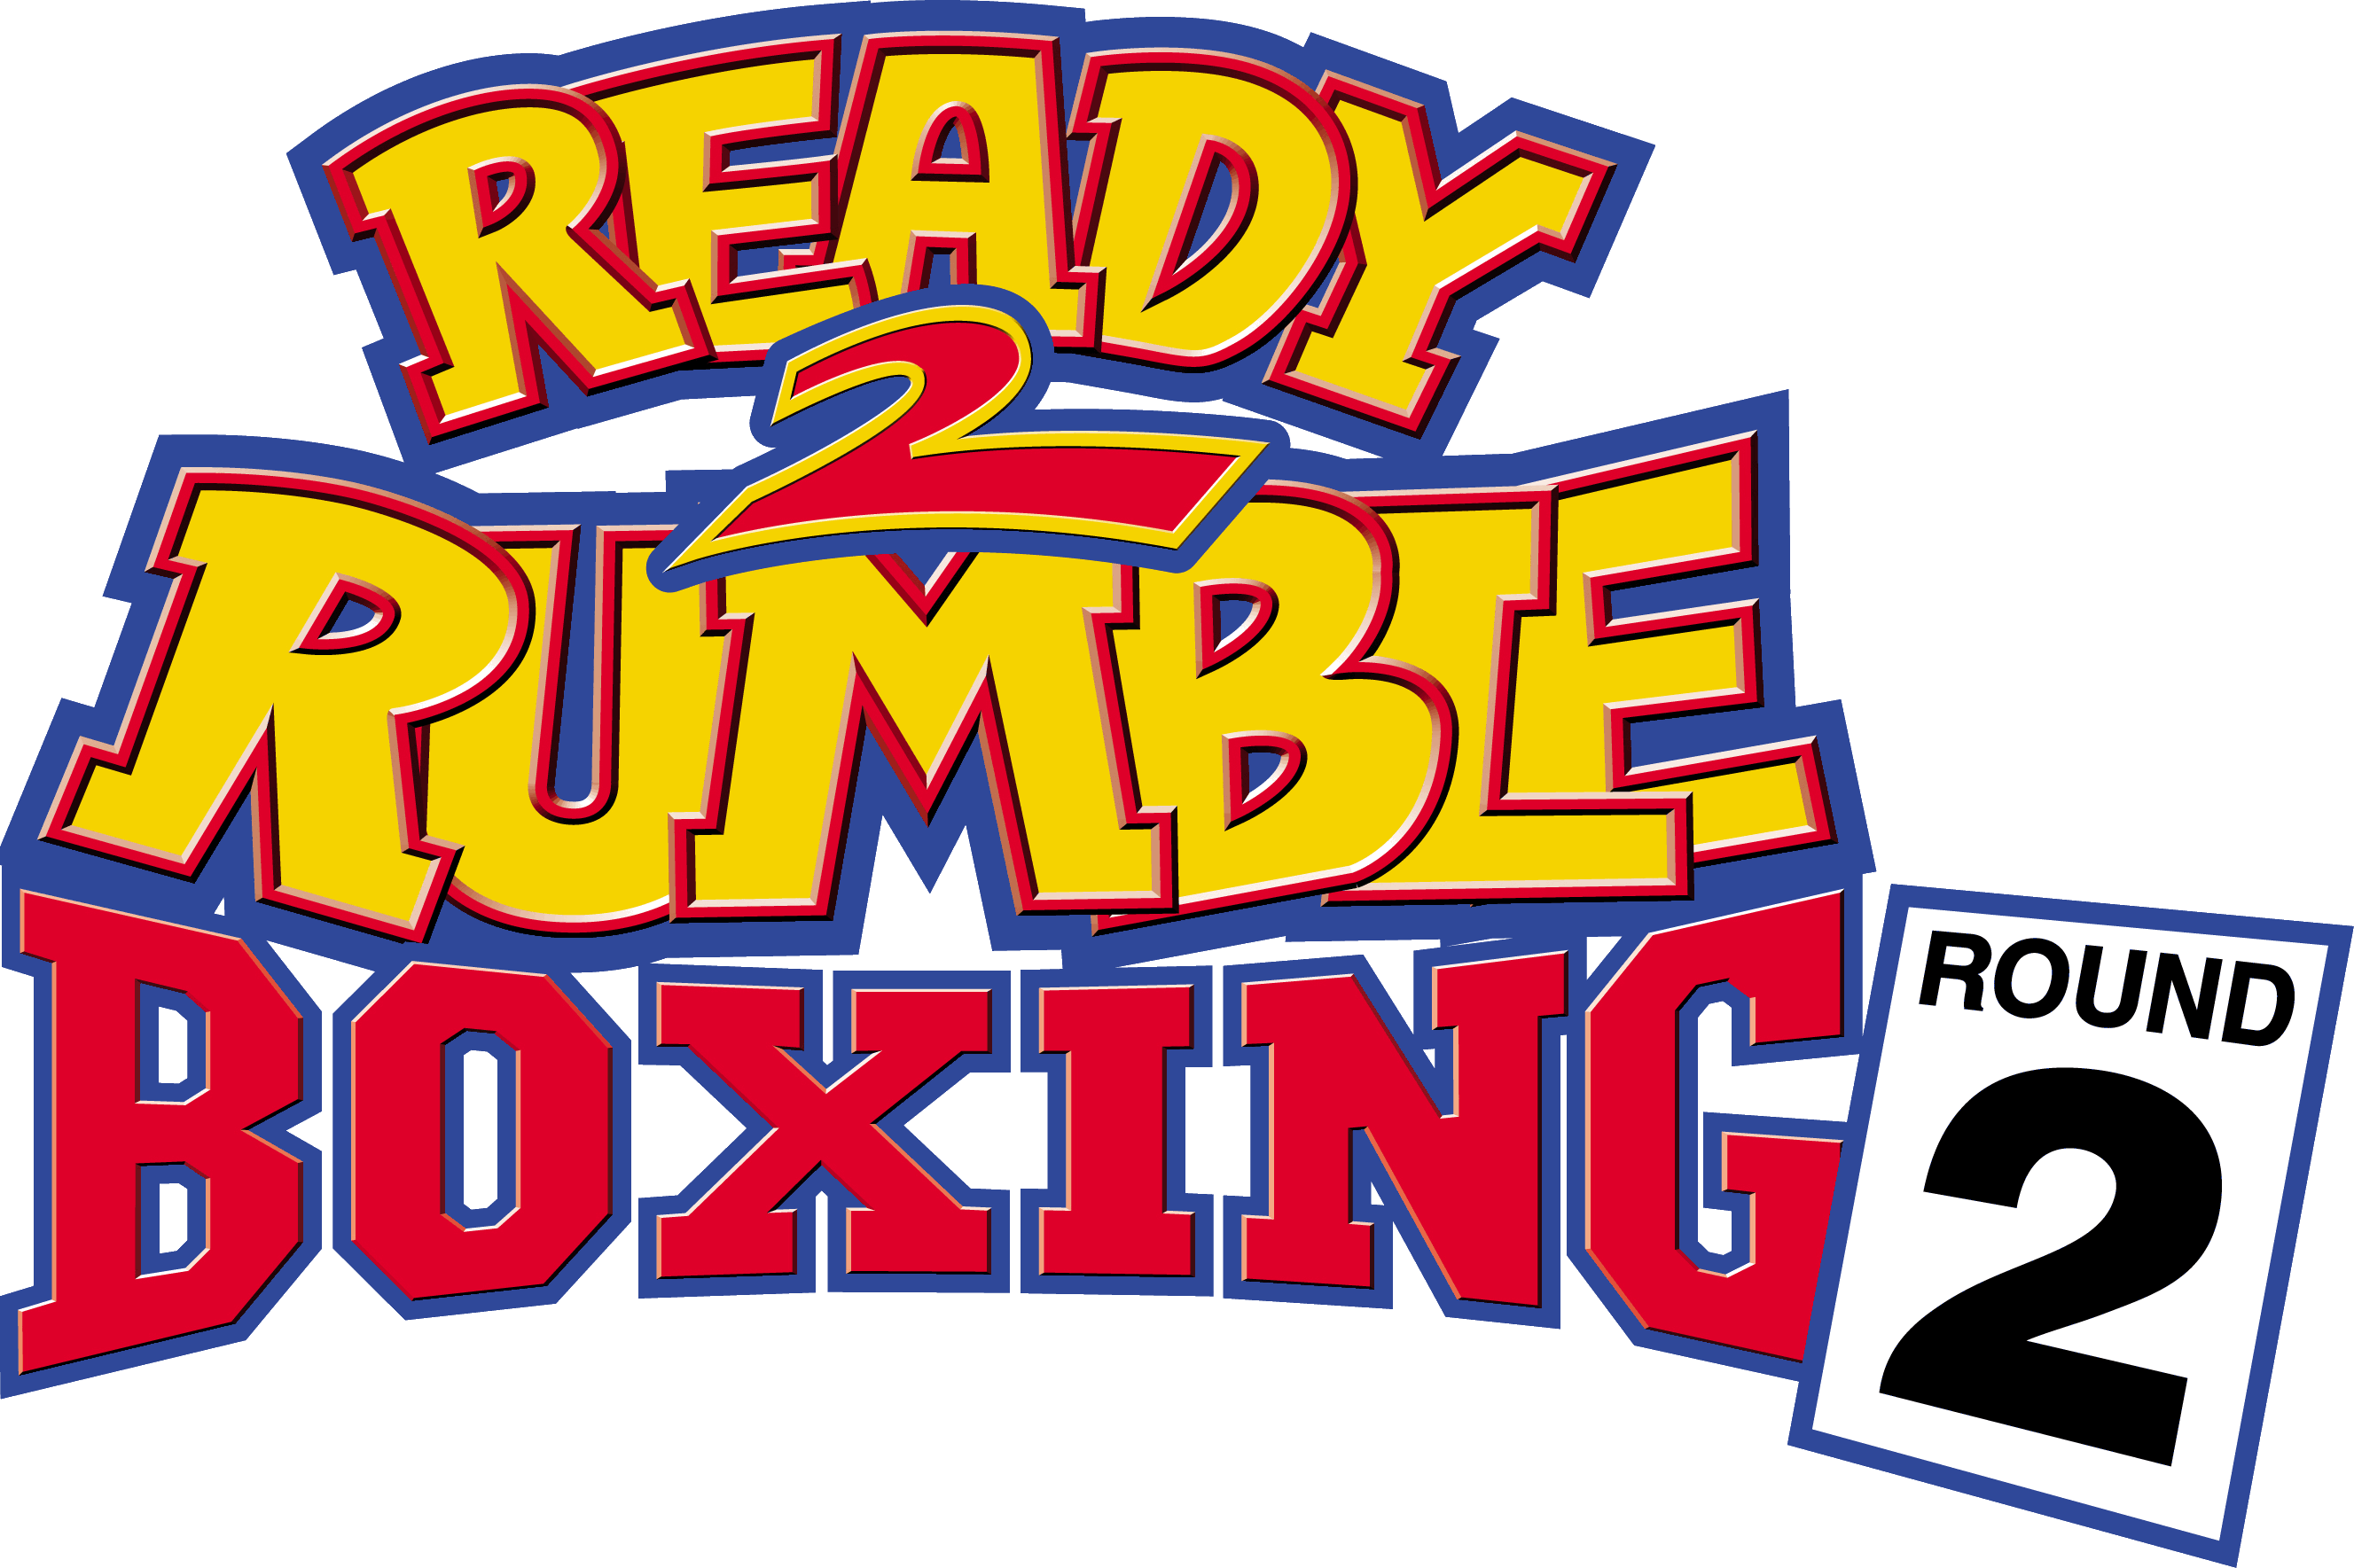 Ready 2 Rumble Boxing: Round 2. Ready 2 Rumble Boxing: Round 2 ps2. Ready 2 Rumble Boxing ps1. Ready 2 Rumble Boxing Round 2 ps1 русская psxplanet. Ready 2 use